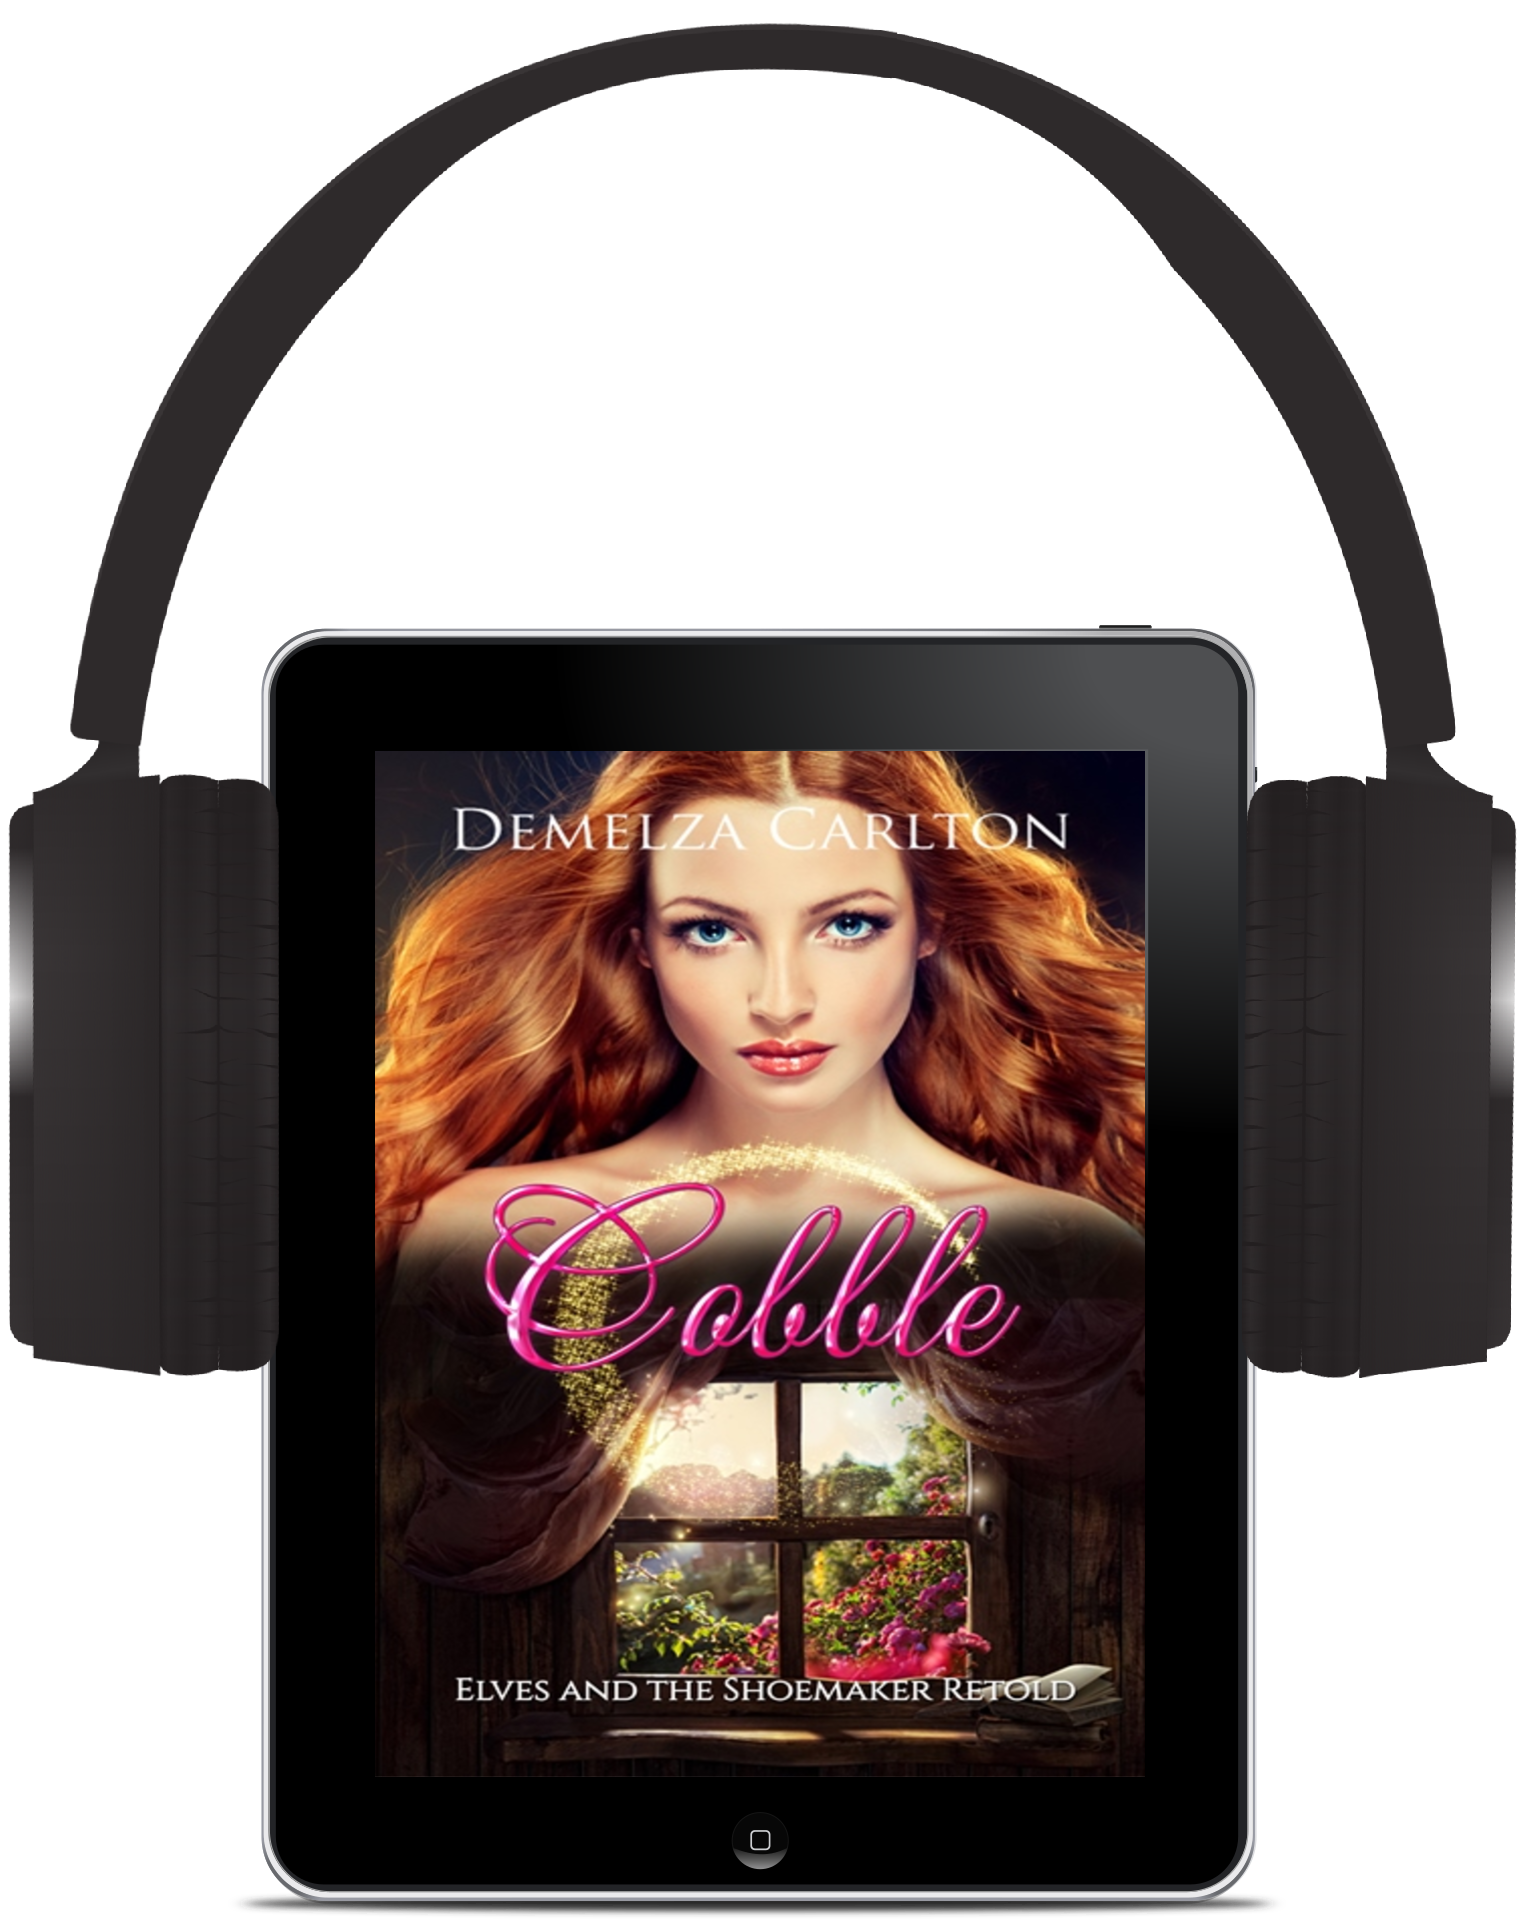 Cobble: Elves and the Shoemaker Retold (Book 18 in the Romance a Medieval Fairytale series) AUDIOBOOK